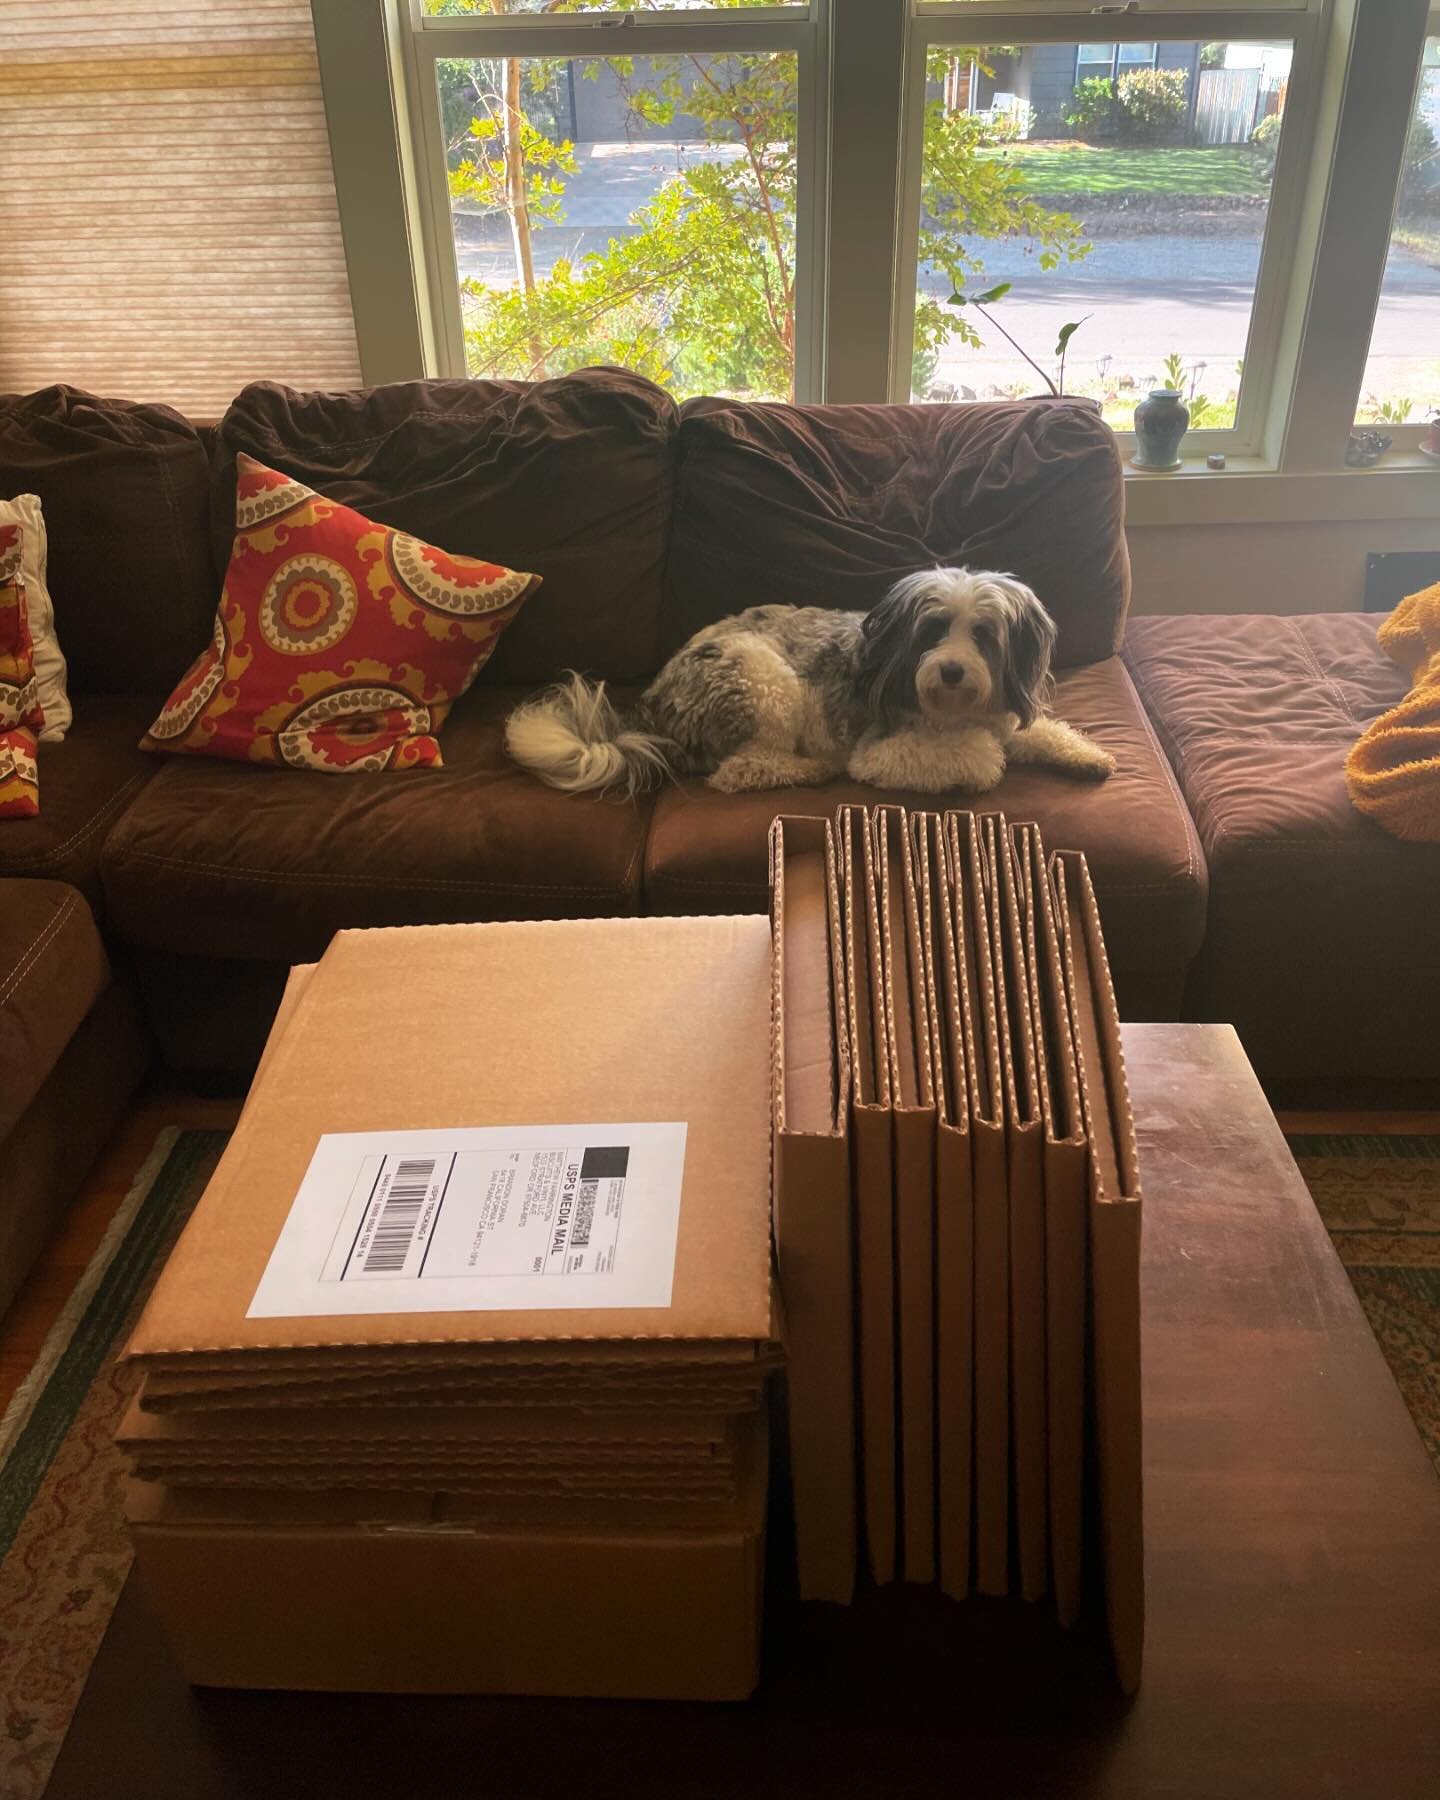 Busy morning at B&amp;V International Headquarters (aka the house). Lots of RSD exclusives packed up and ready to ship out!

#supportyourlocalrecordstore